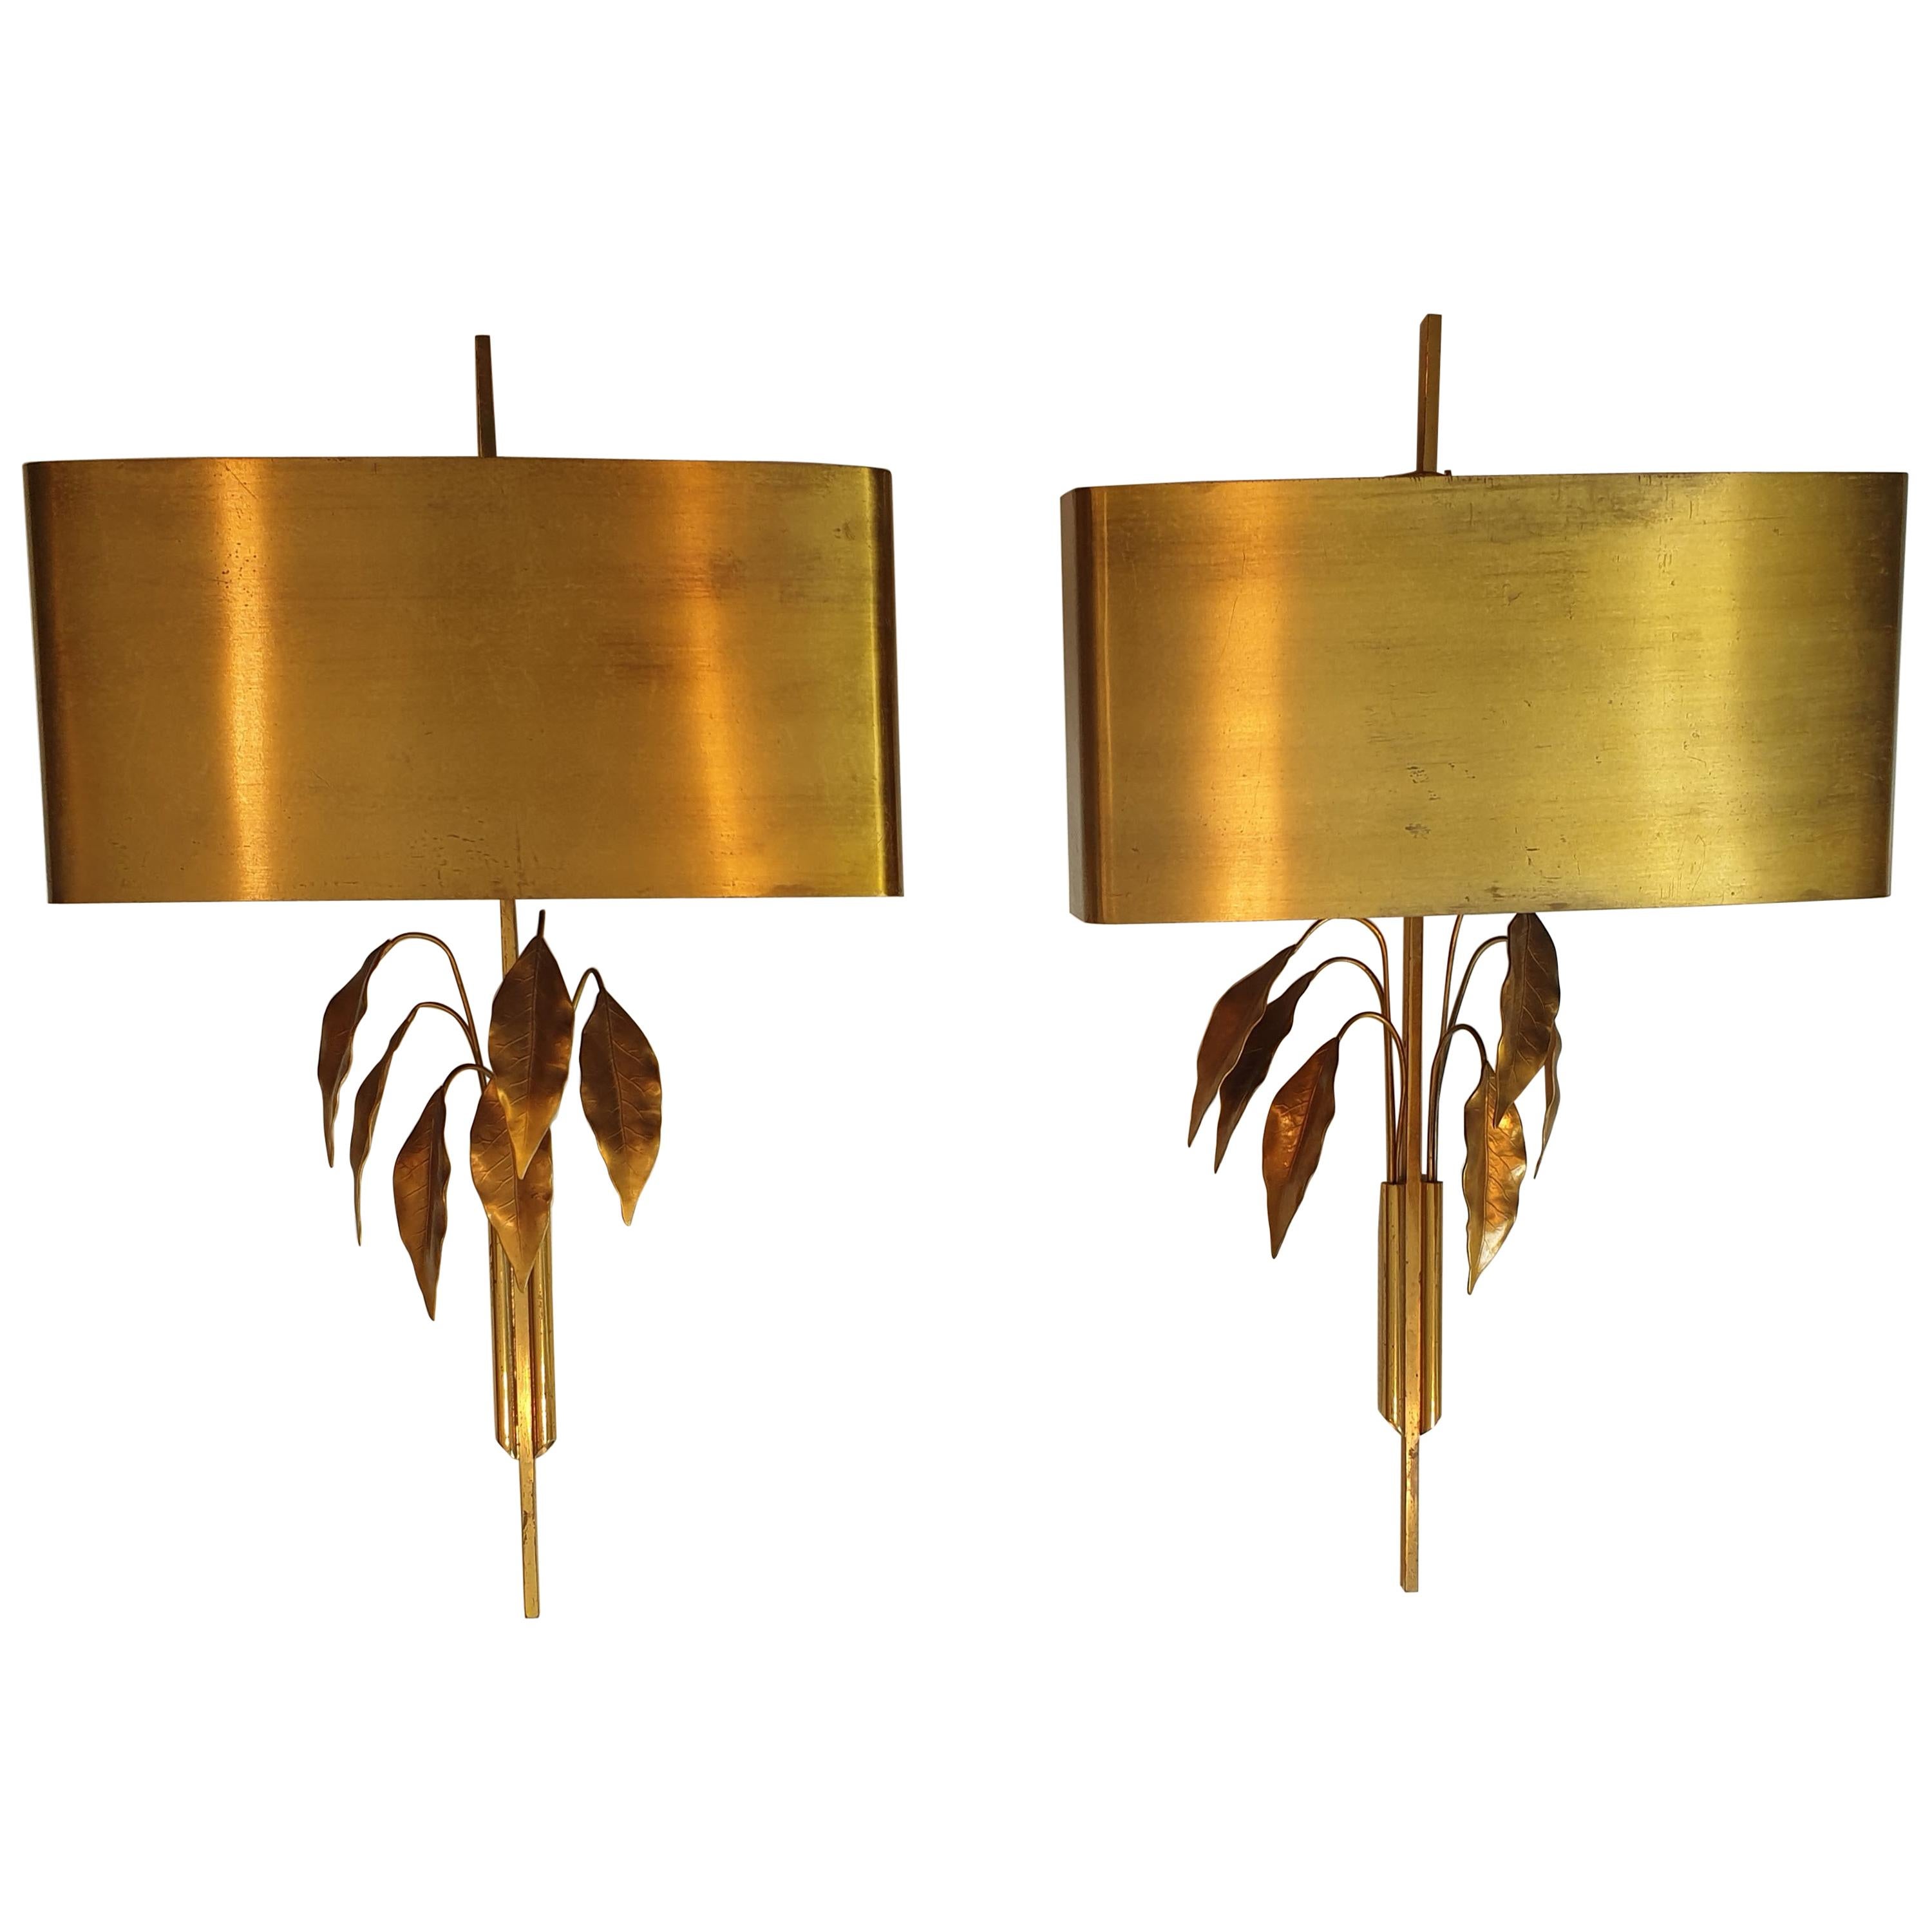 Pair of Mid-Century Modern French Brass Wall Lights